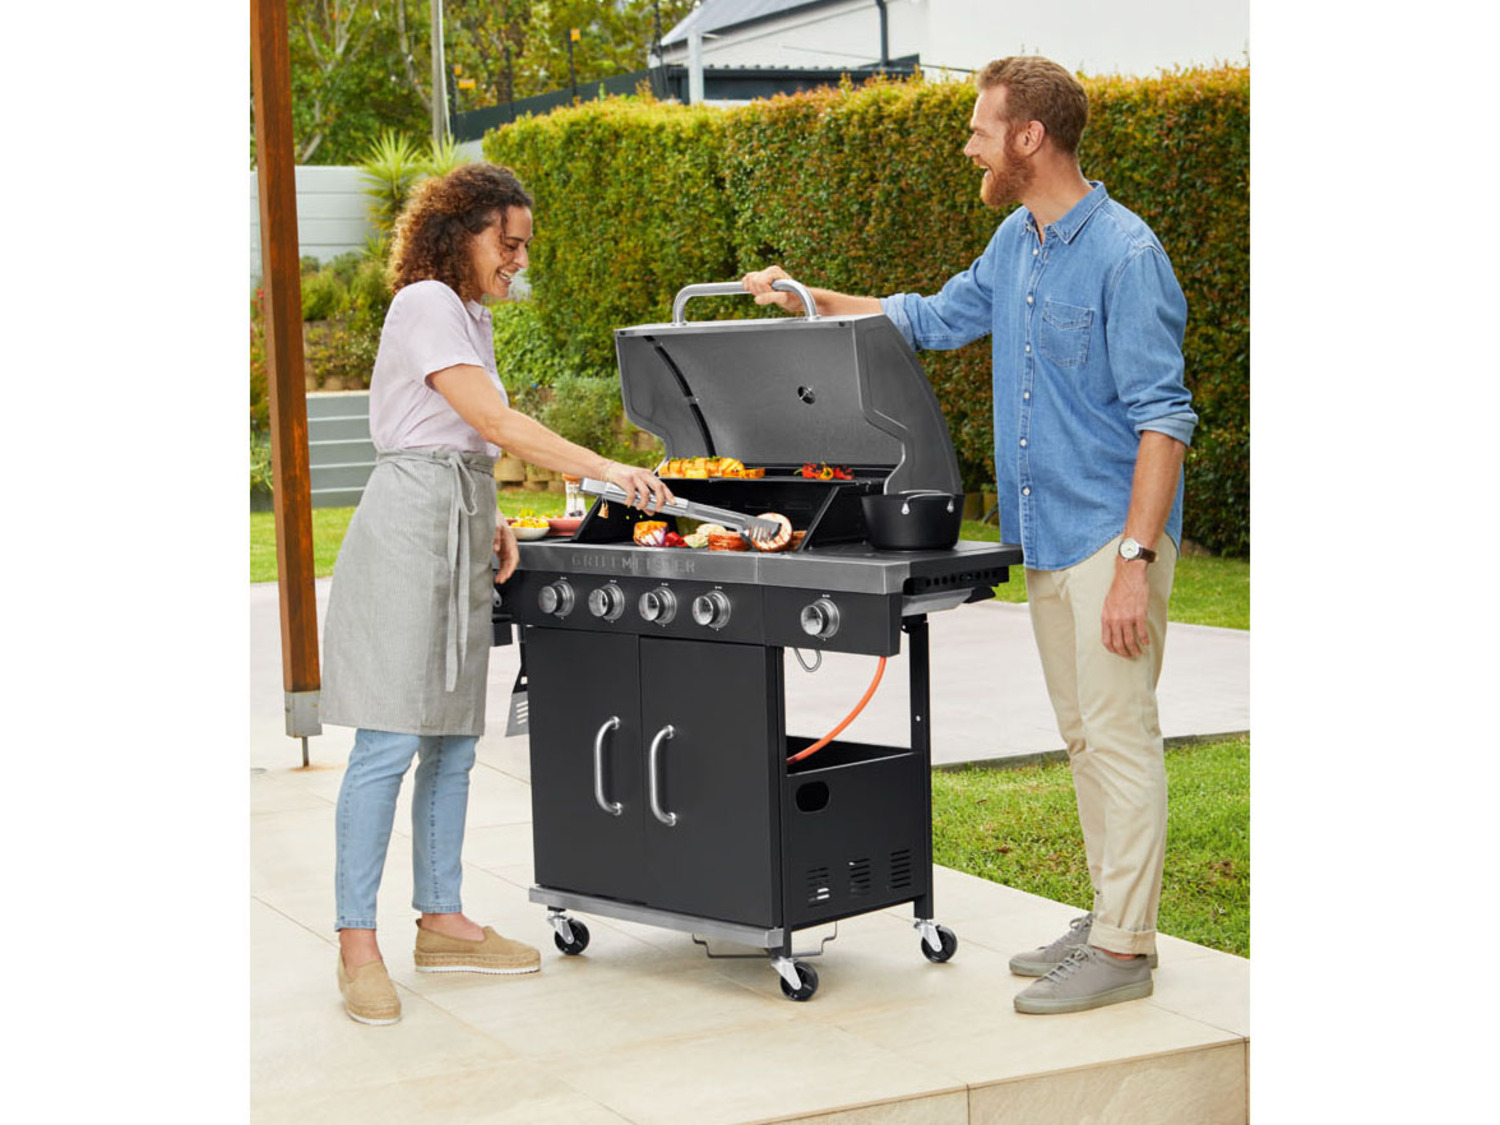 GRILLMEISTER Gasgrill, | 19,7 kW Brenner, 4plus1 LIDL